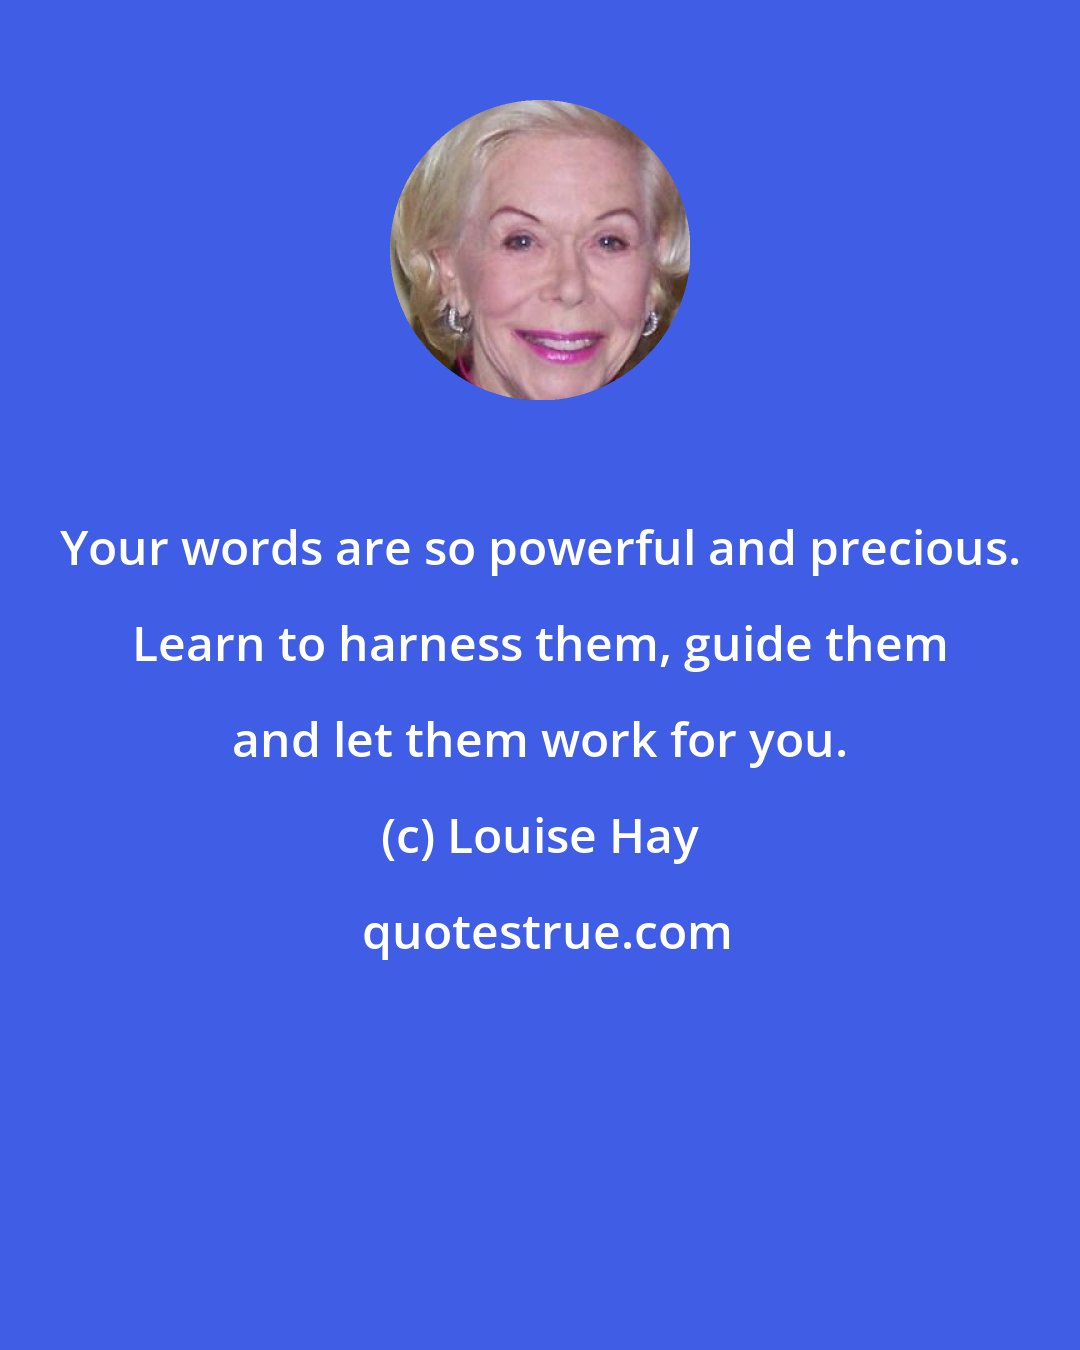 Louise Hay: Your words are so powerful and precious. Learn to harness them, guide them and let them work for you.